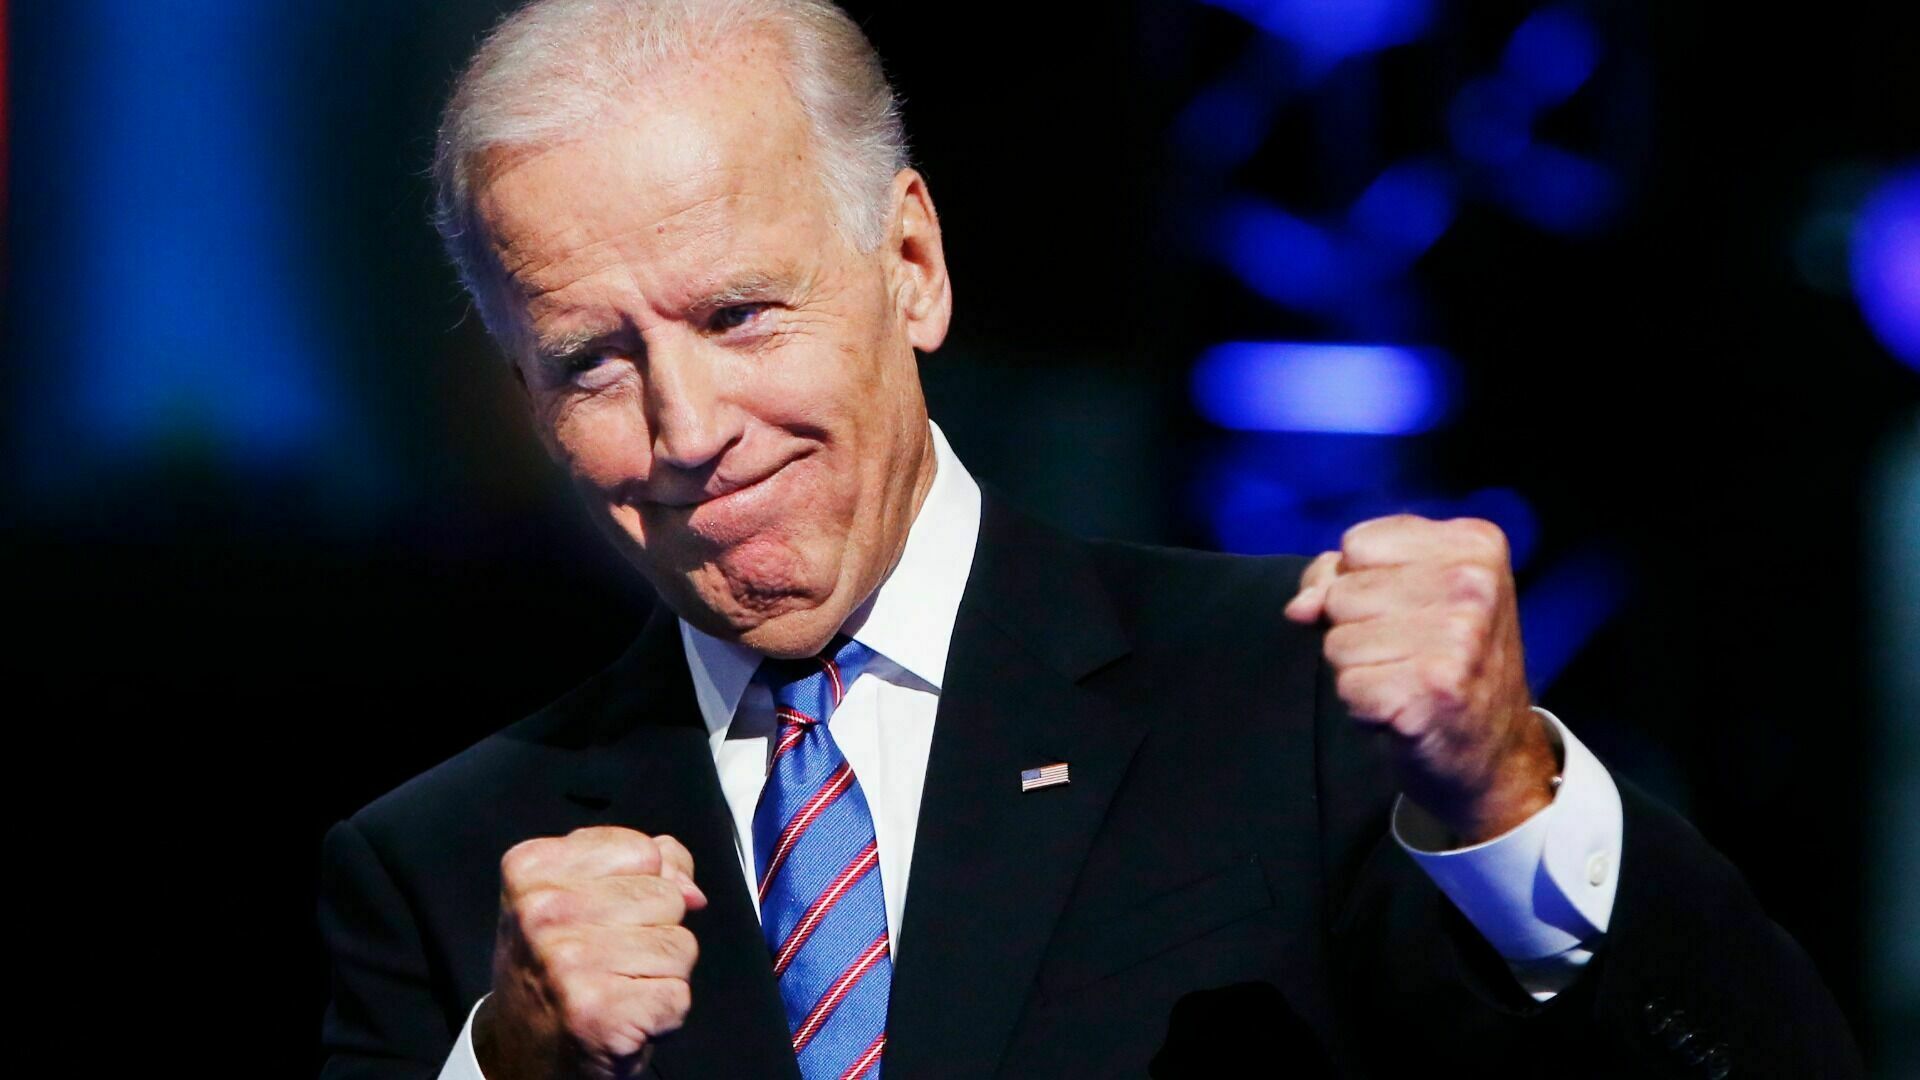 Secret documents were found in Biden's personal safe outside the White House